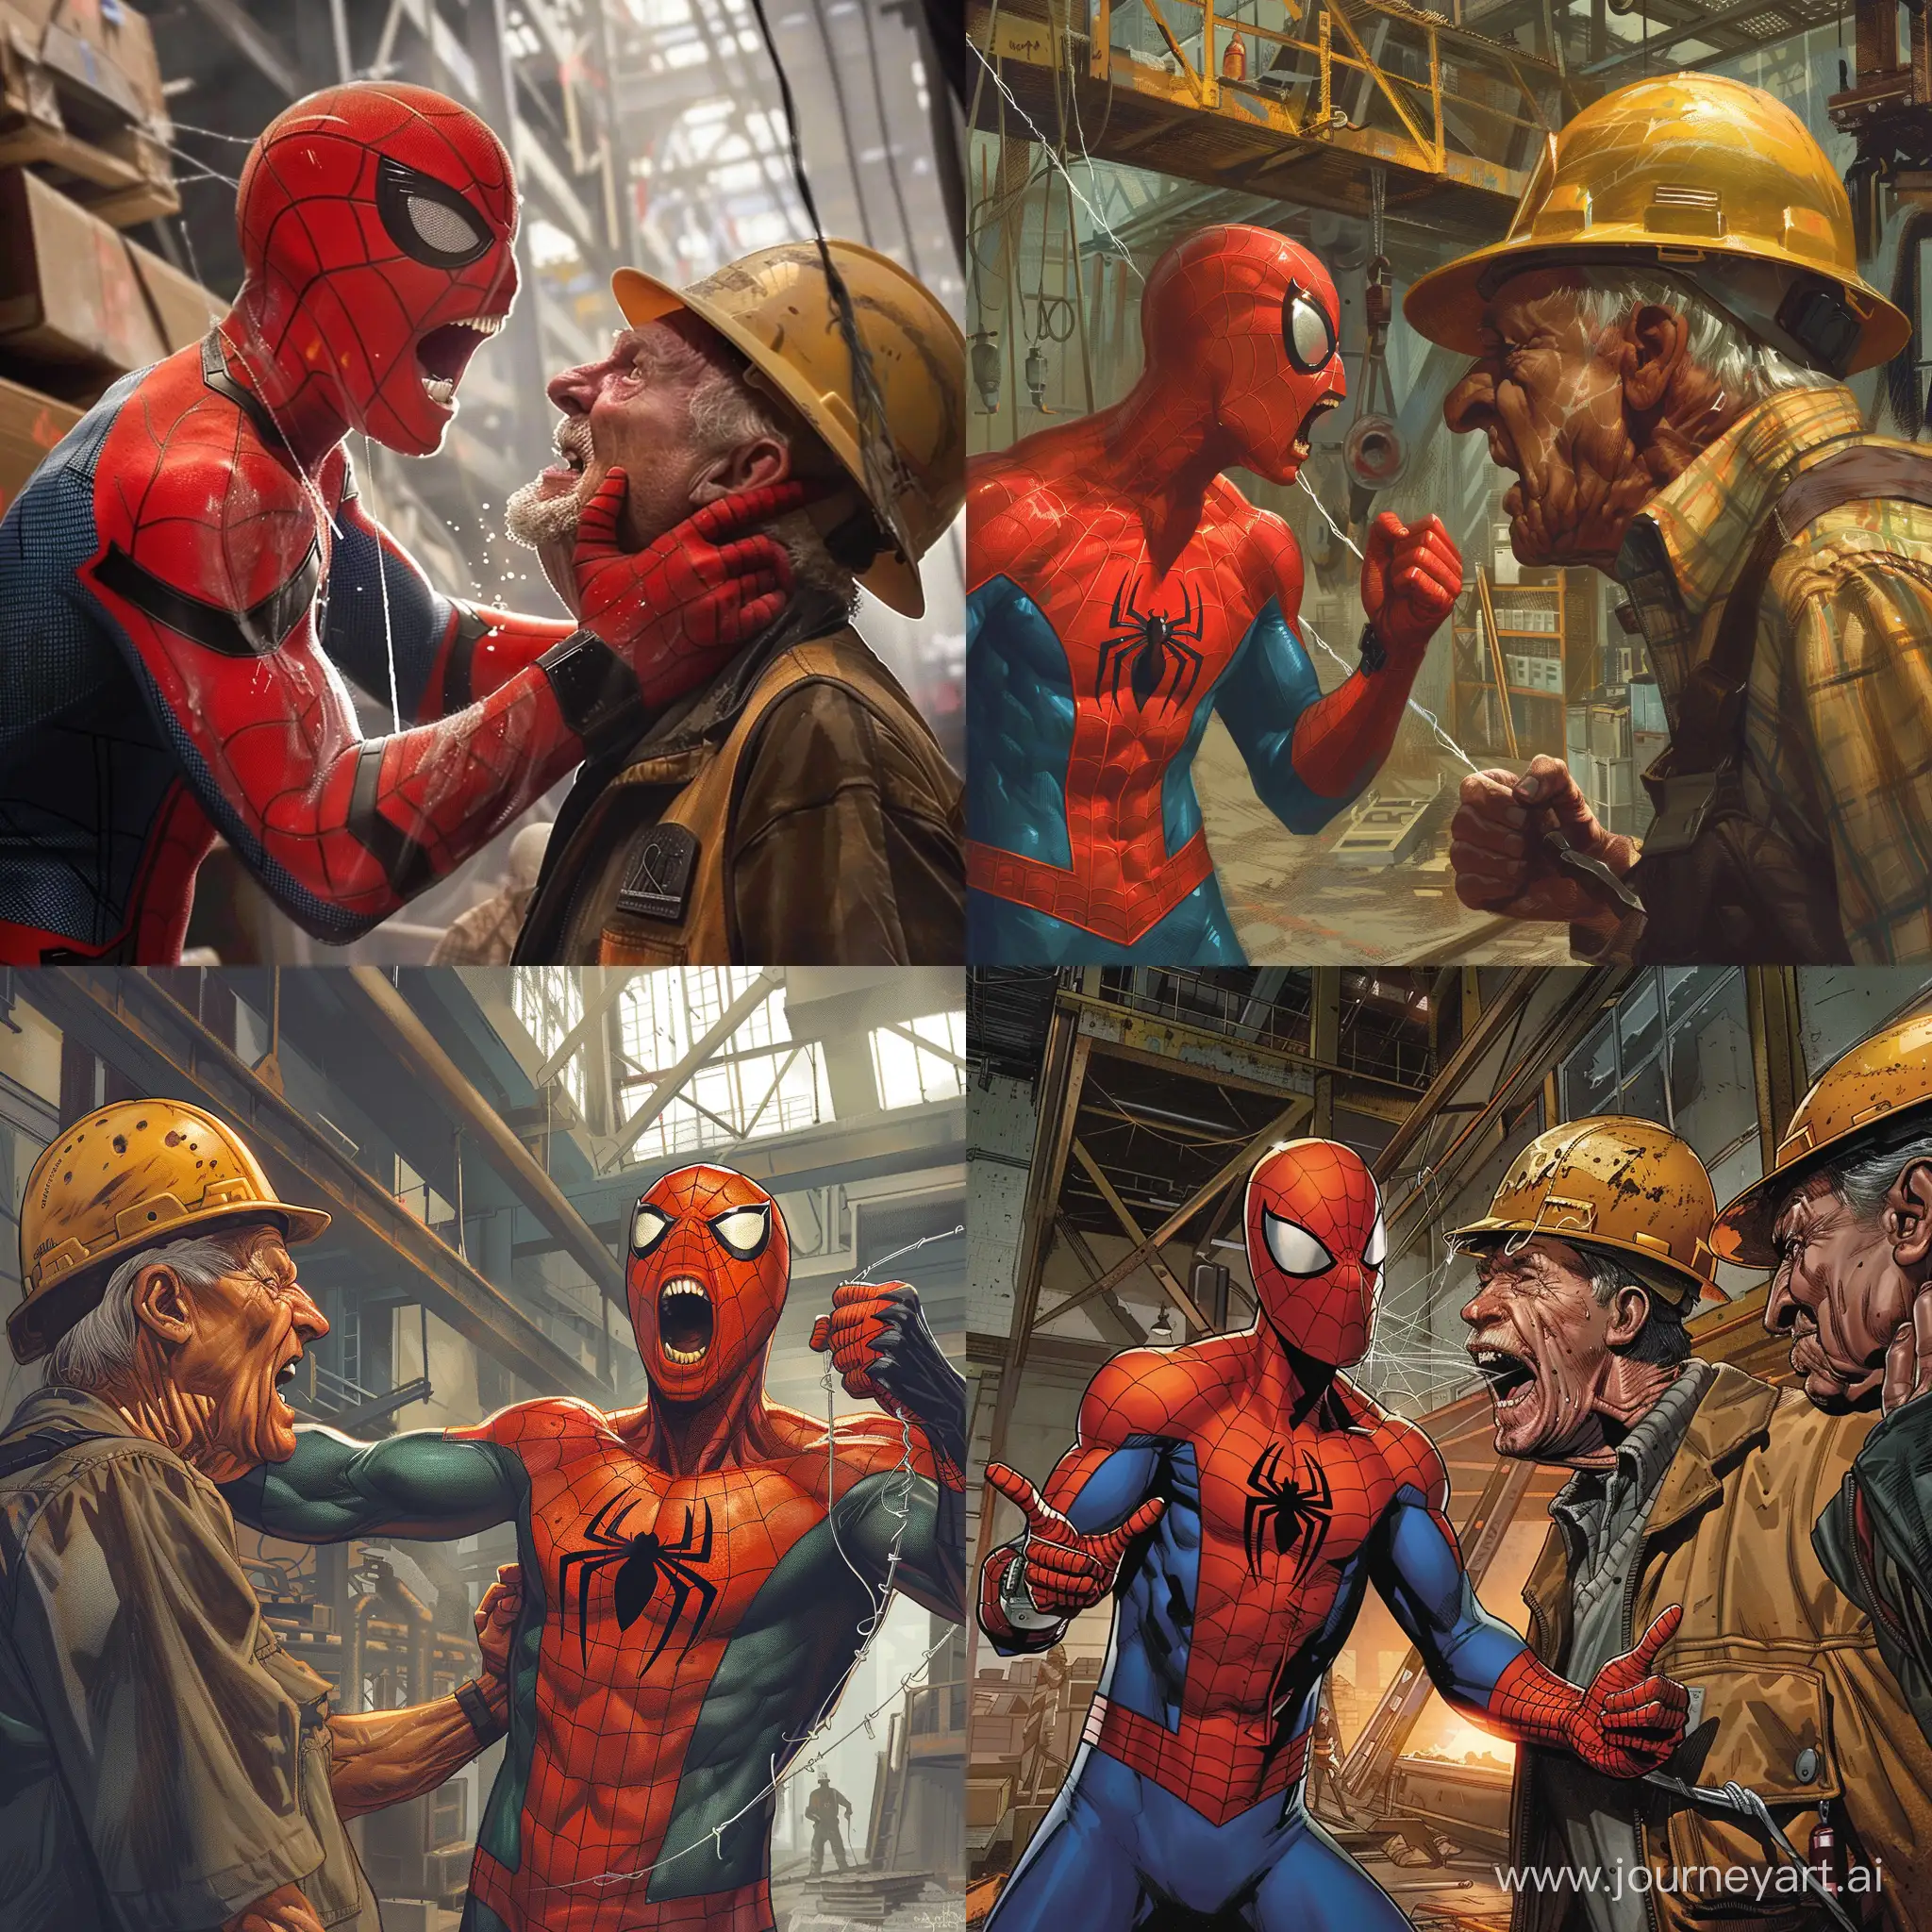 Spiderman being yelled at by an elderly construction worker in a factory